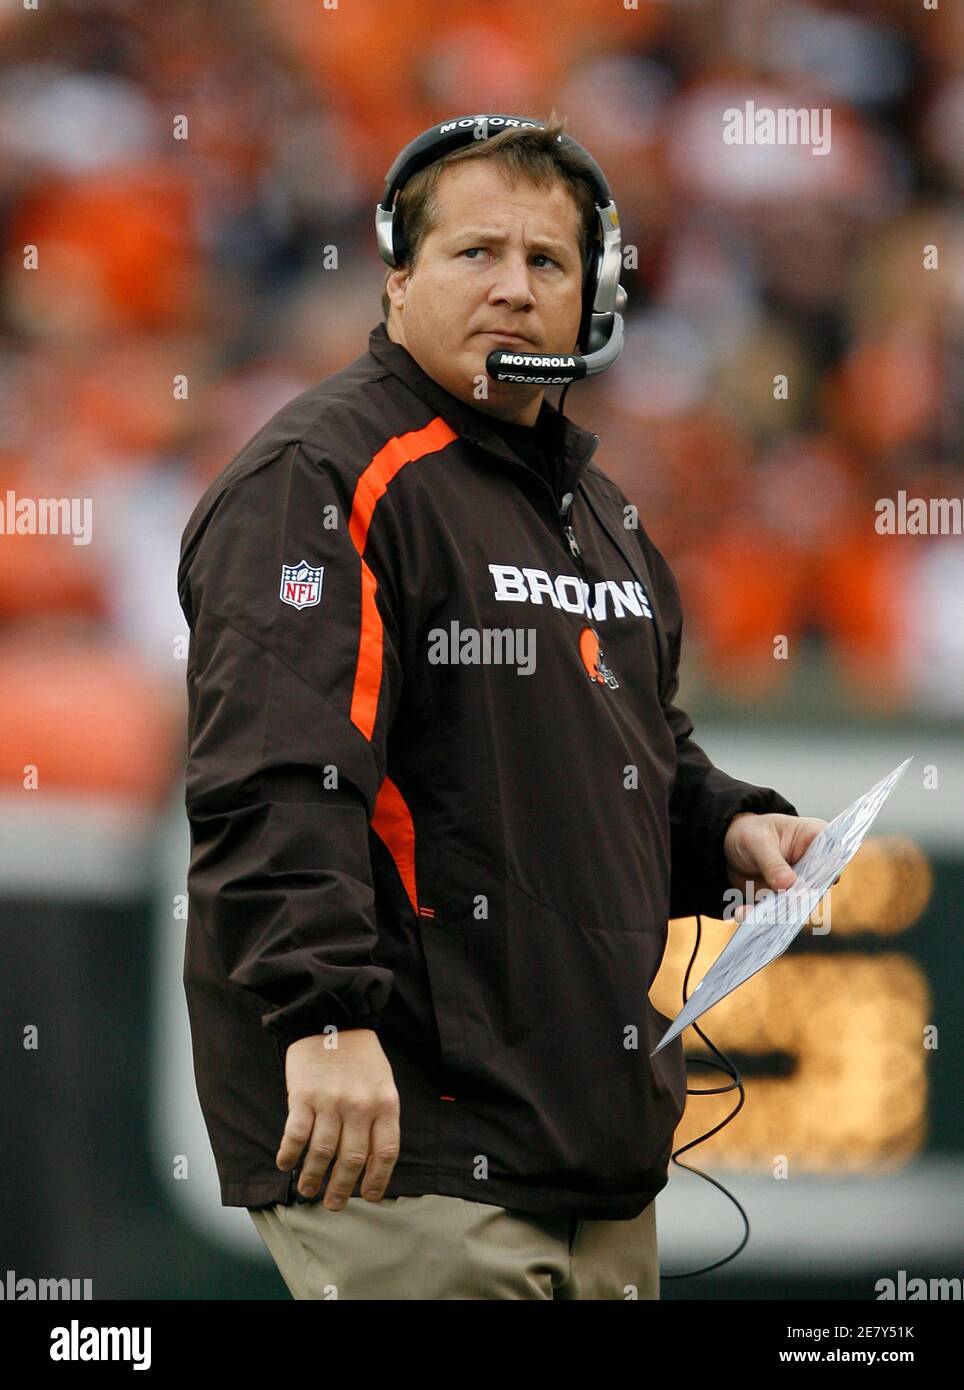 Cleveland Browns head coach Eric Mangini reacts to his team's play against  the Cincinnati Bengals during the first half of their NFL football game  Paul Brown Stadium in Cincinnati, Ohio, November 29,